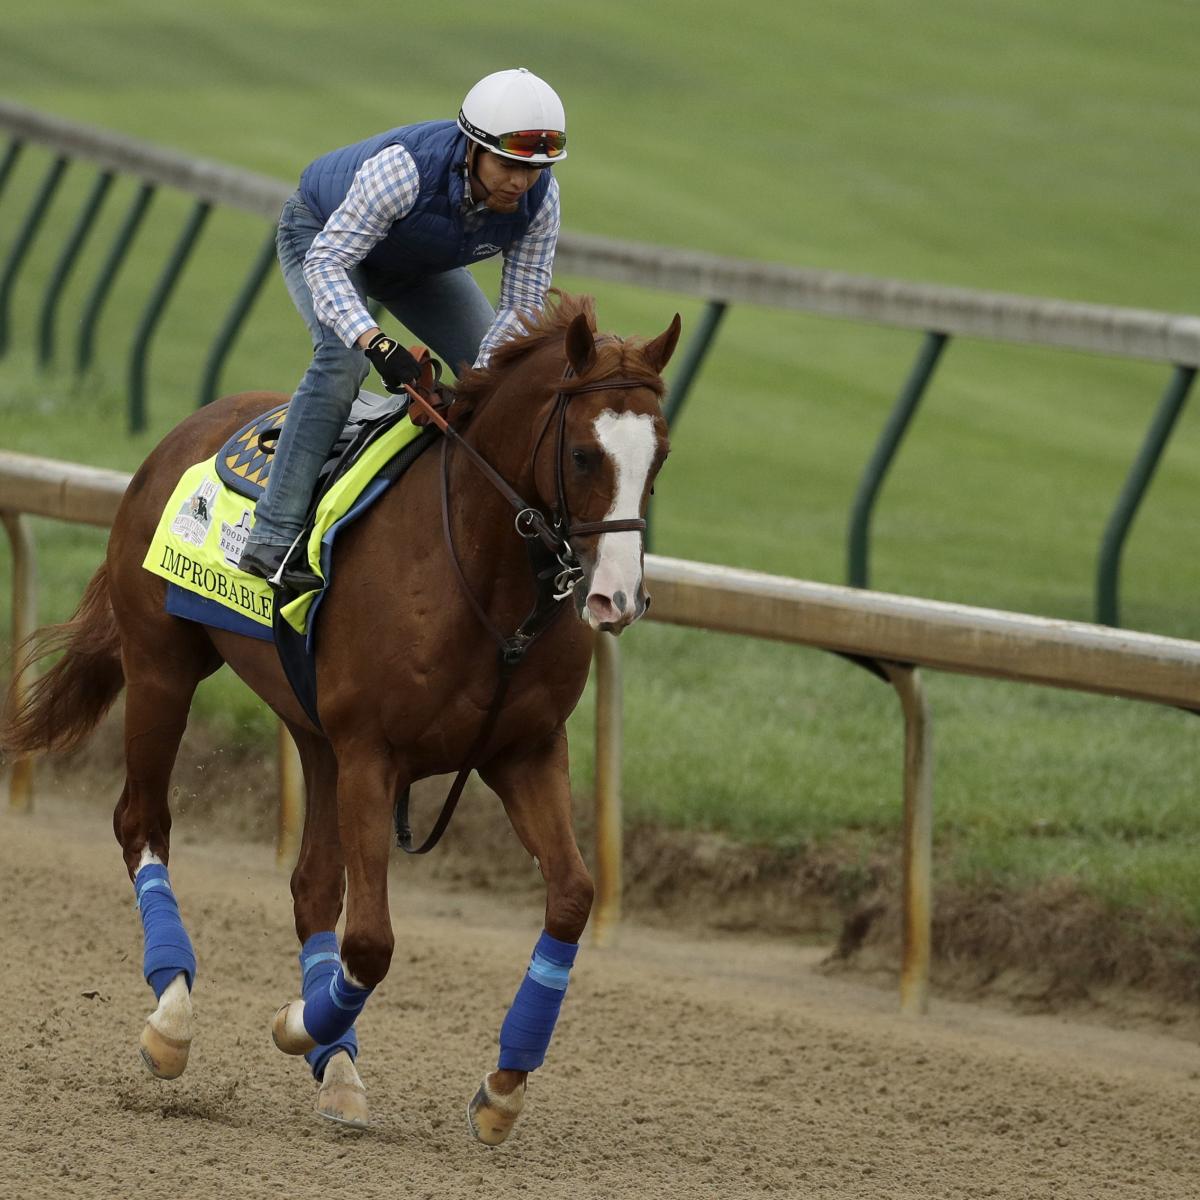 Kentucky Derby Entries 2019 Horse Names, Post Positions, Vegas Odds